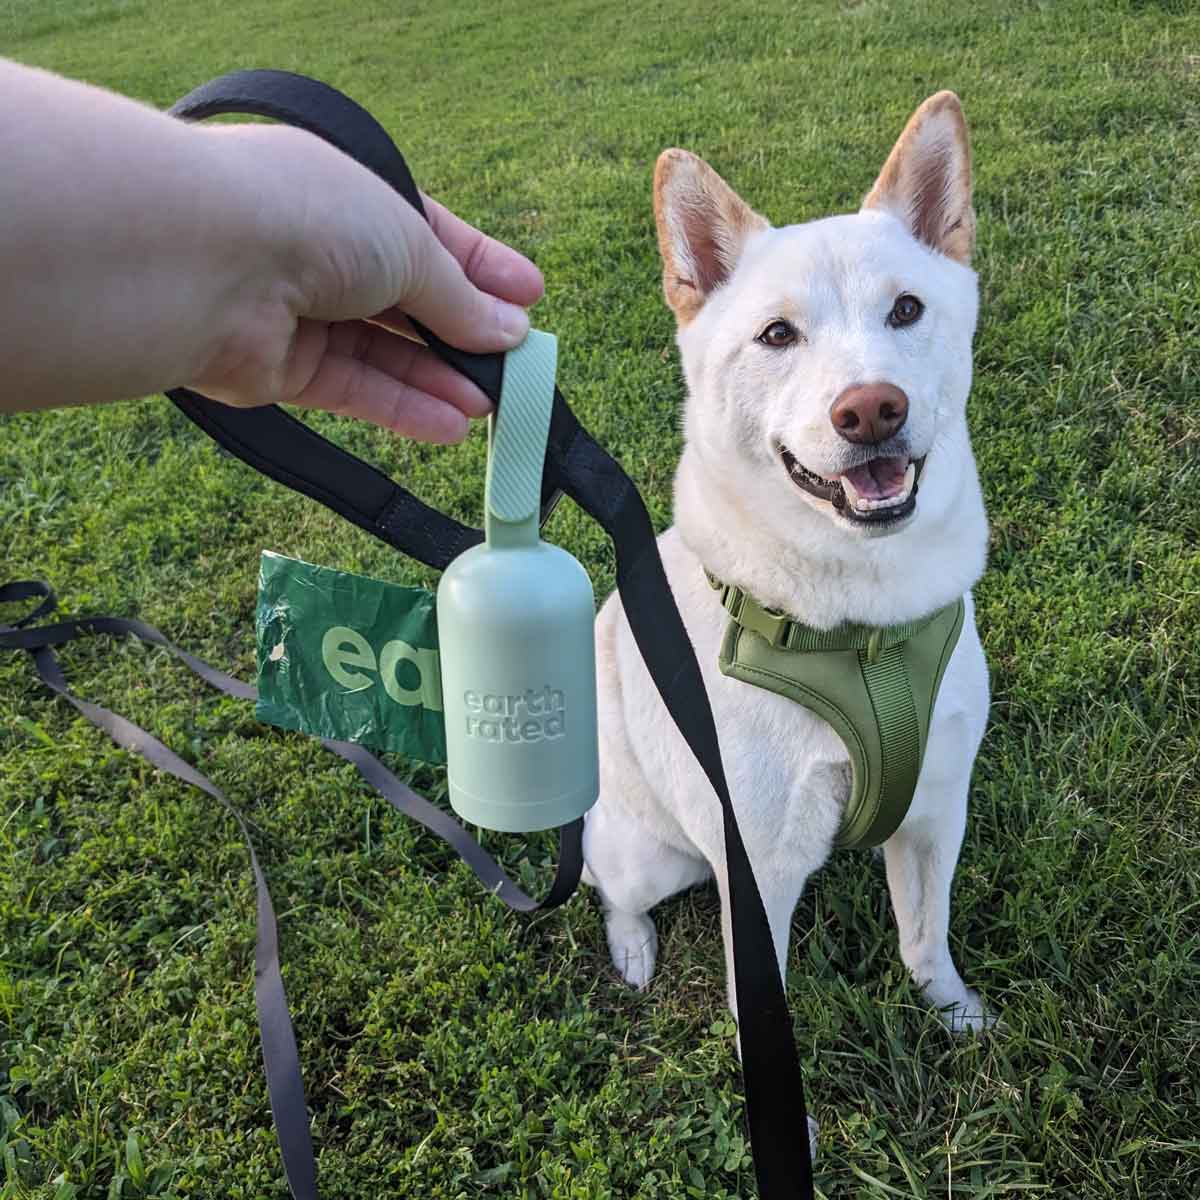 A cream shiba inu sits in the grass as his owner holds up a poop bag dispenser